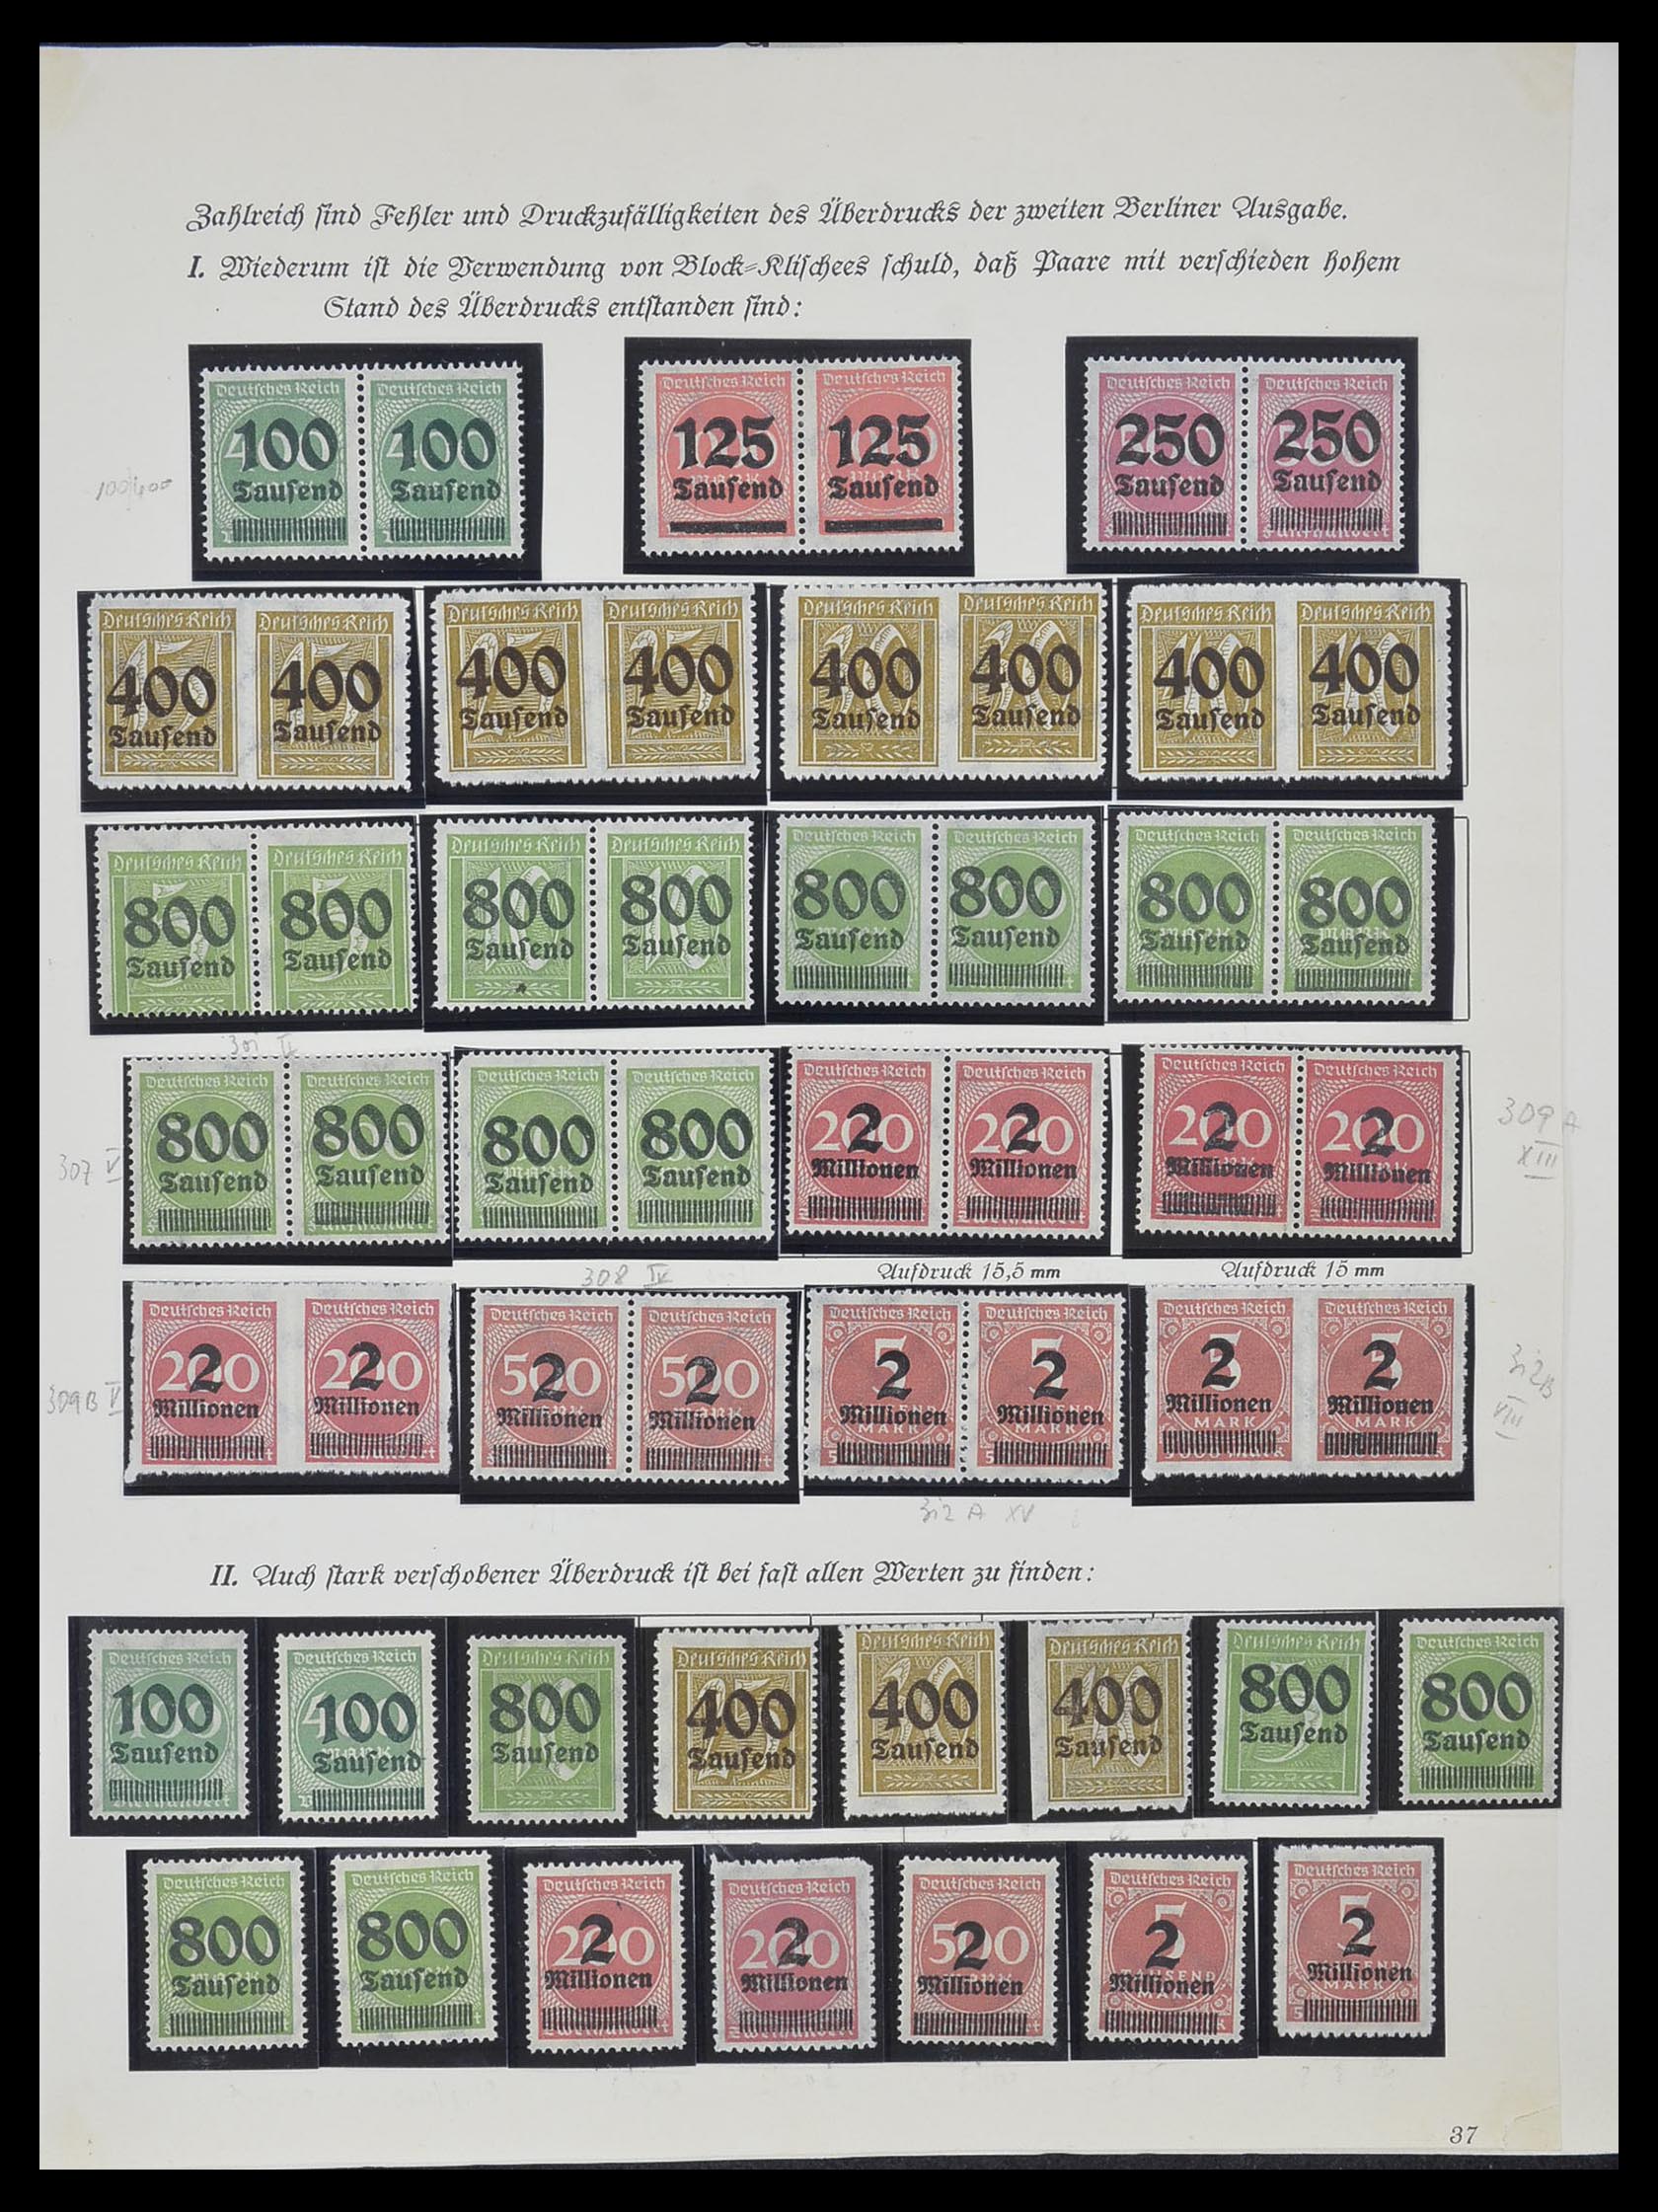 33957 016 - Stamp collection 33957 German Reich infla 1923.